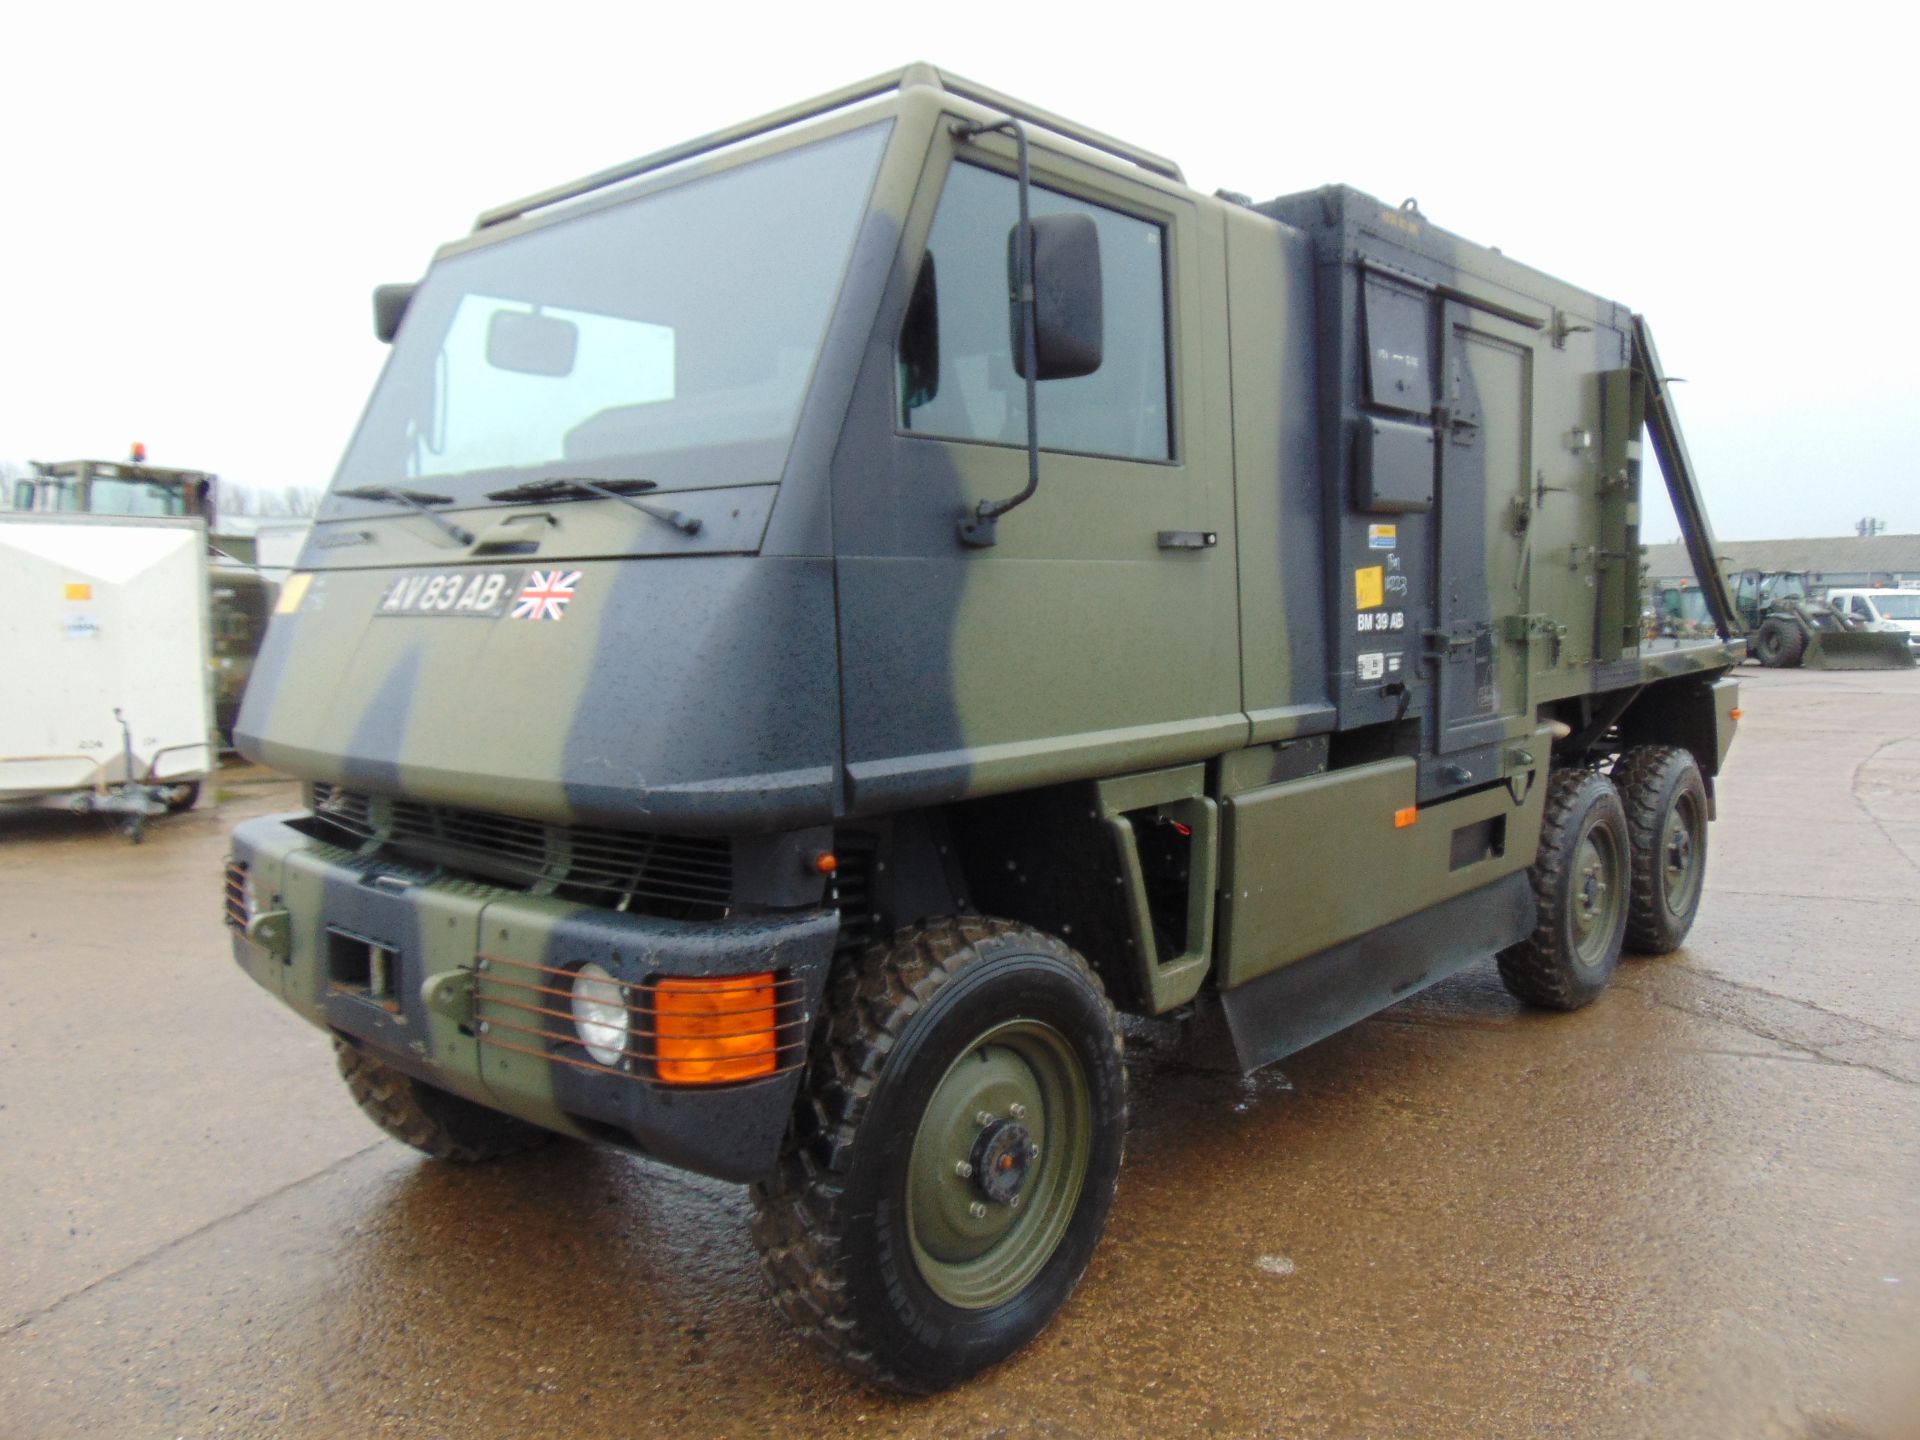 Ex Reserve Left Hand Drive Mowag Bucher Duro II 6x6 High-Mobility Tactical Vehicle. - Image 3 of 16